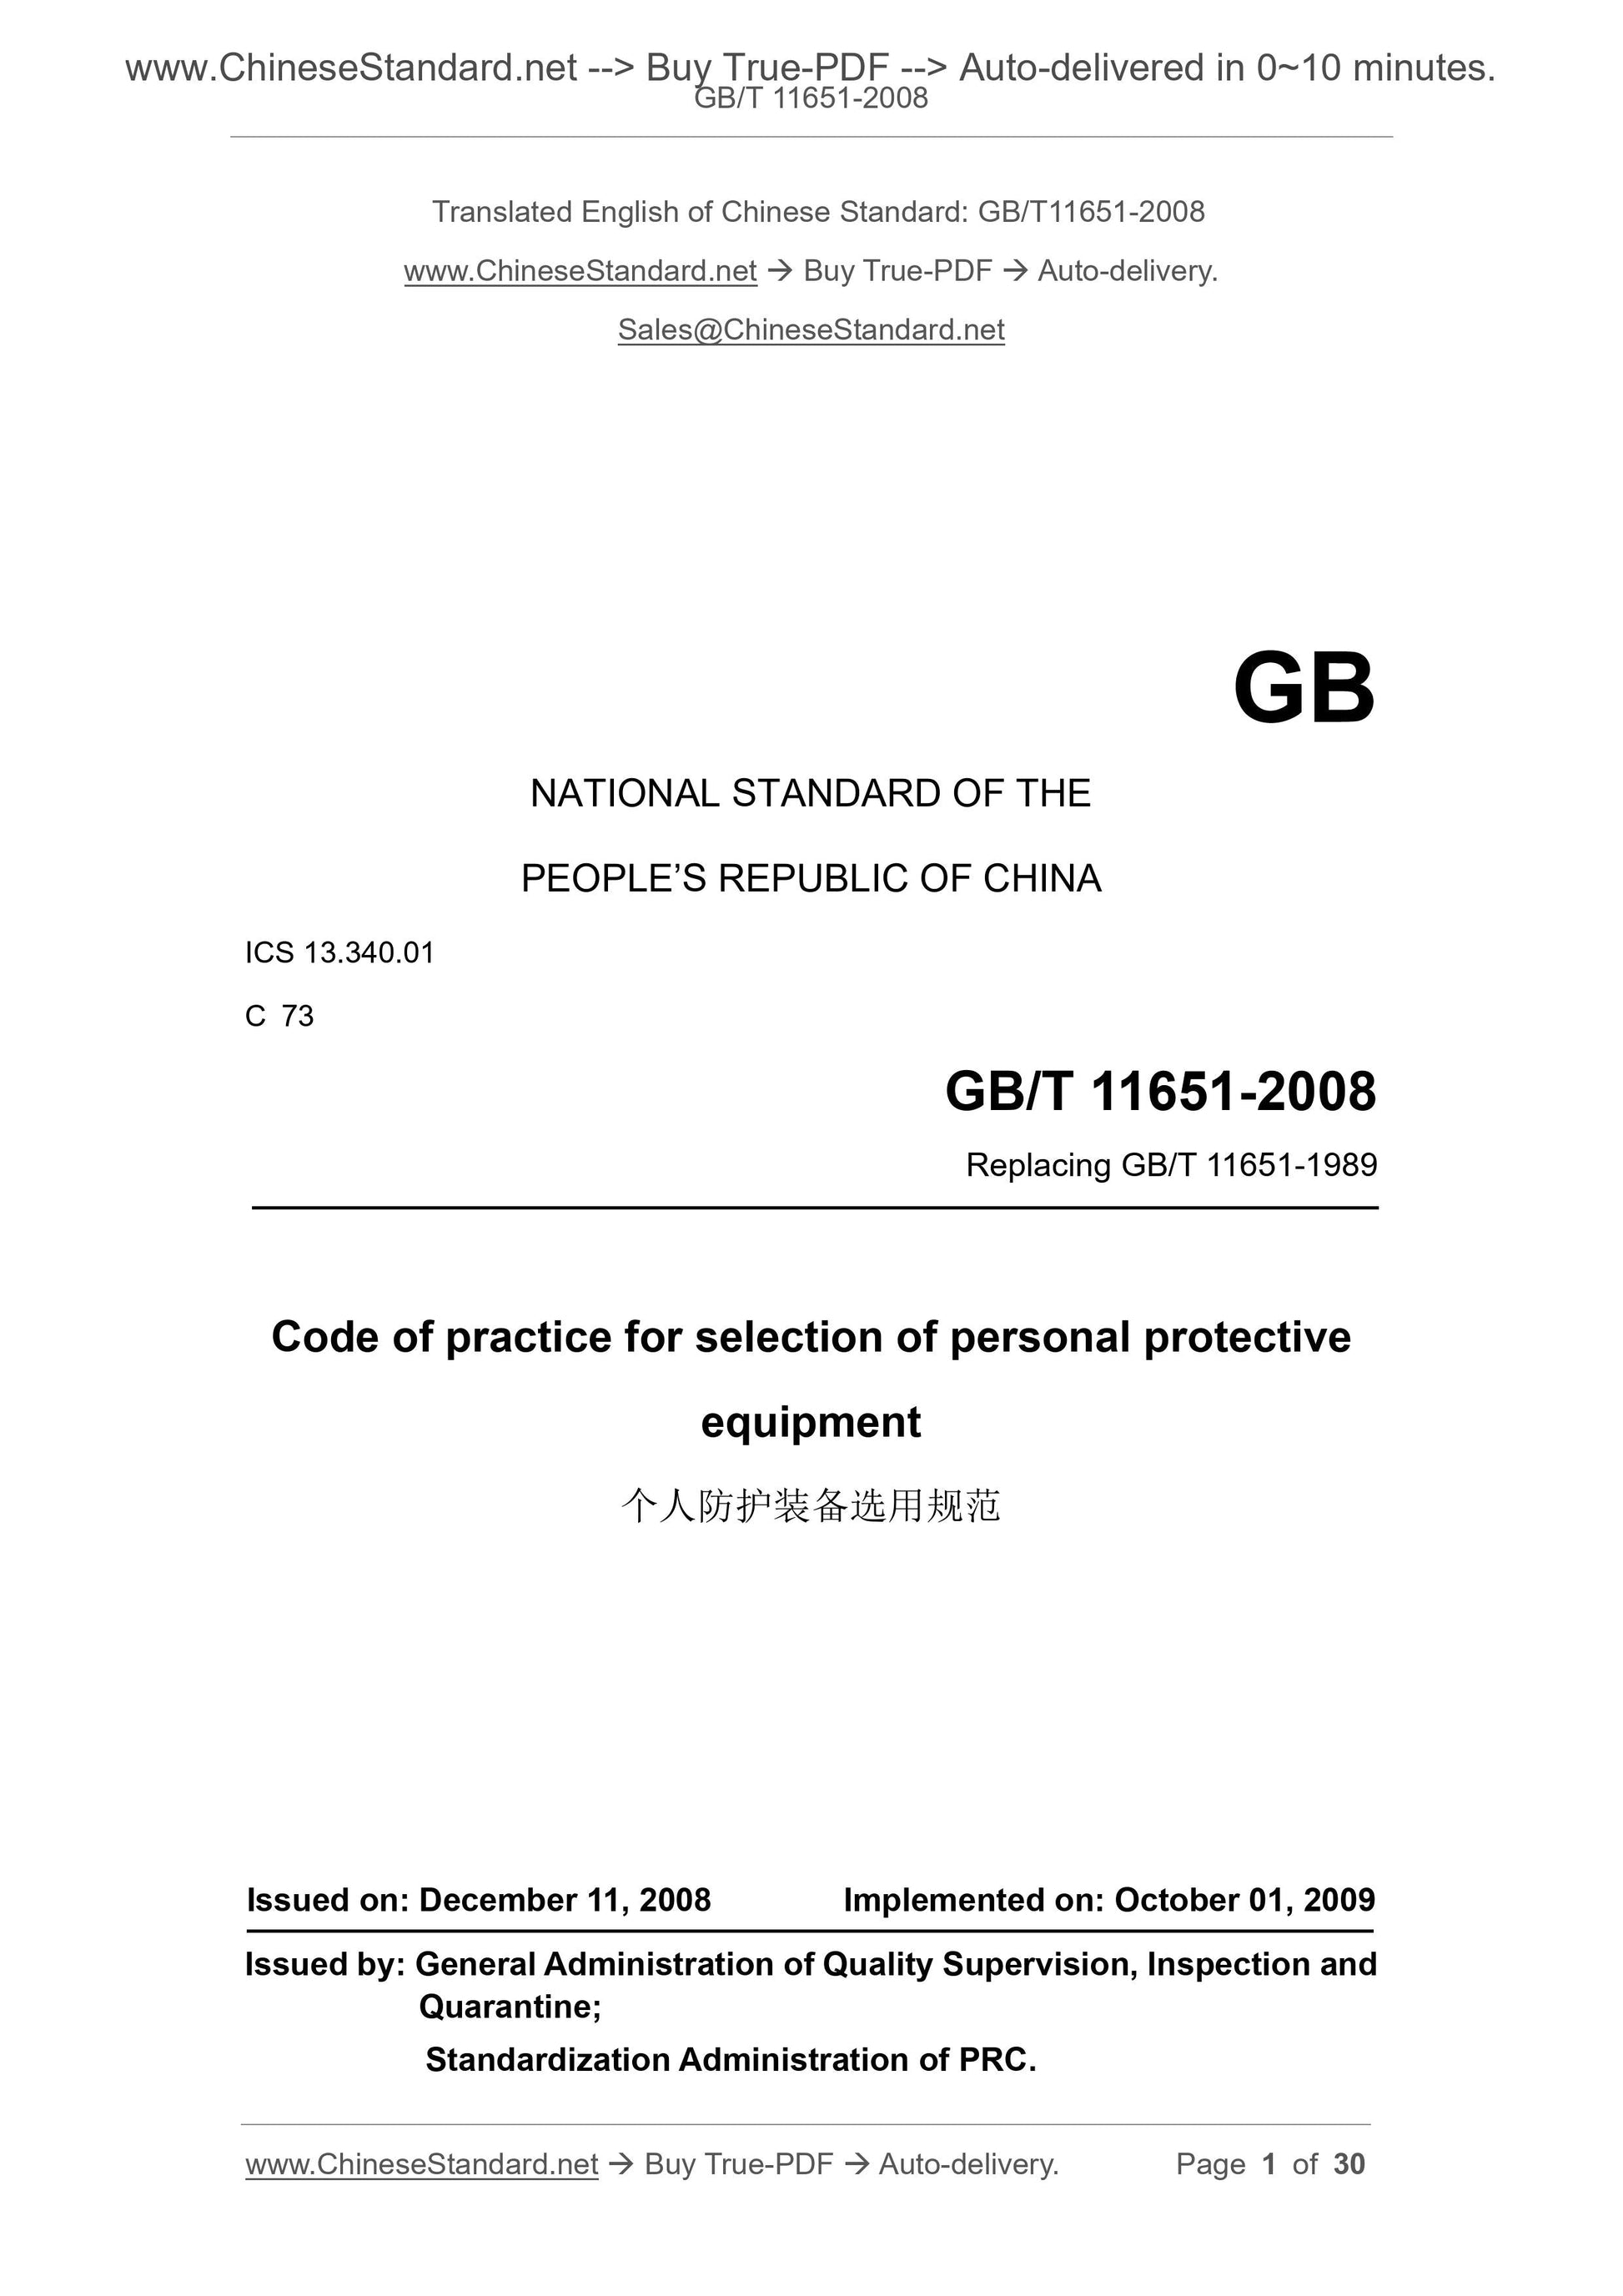 GB/T 11651-2008 Page 1